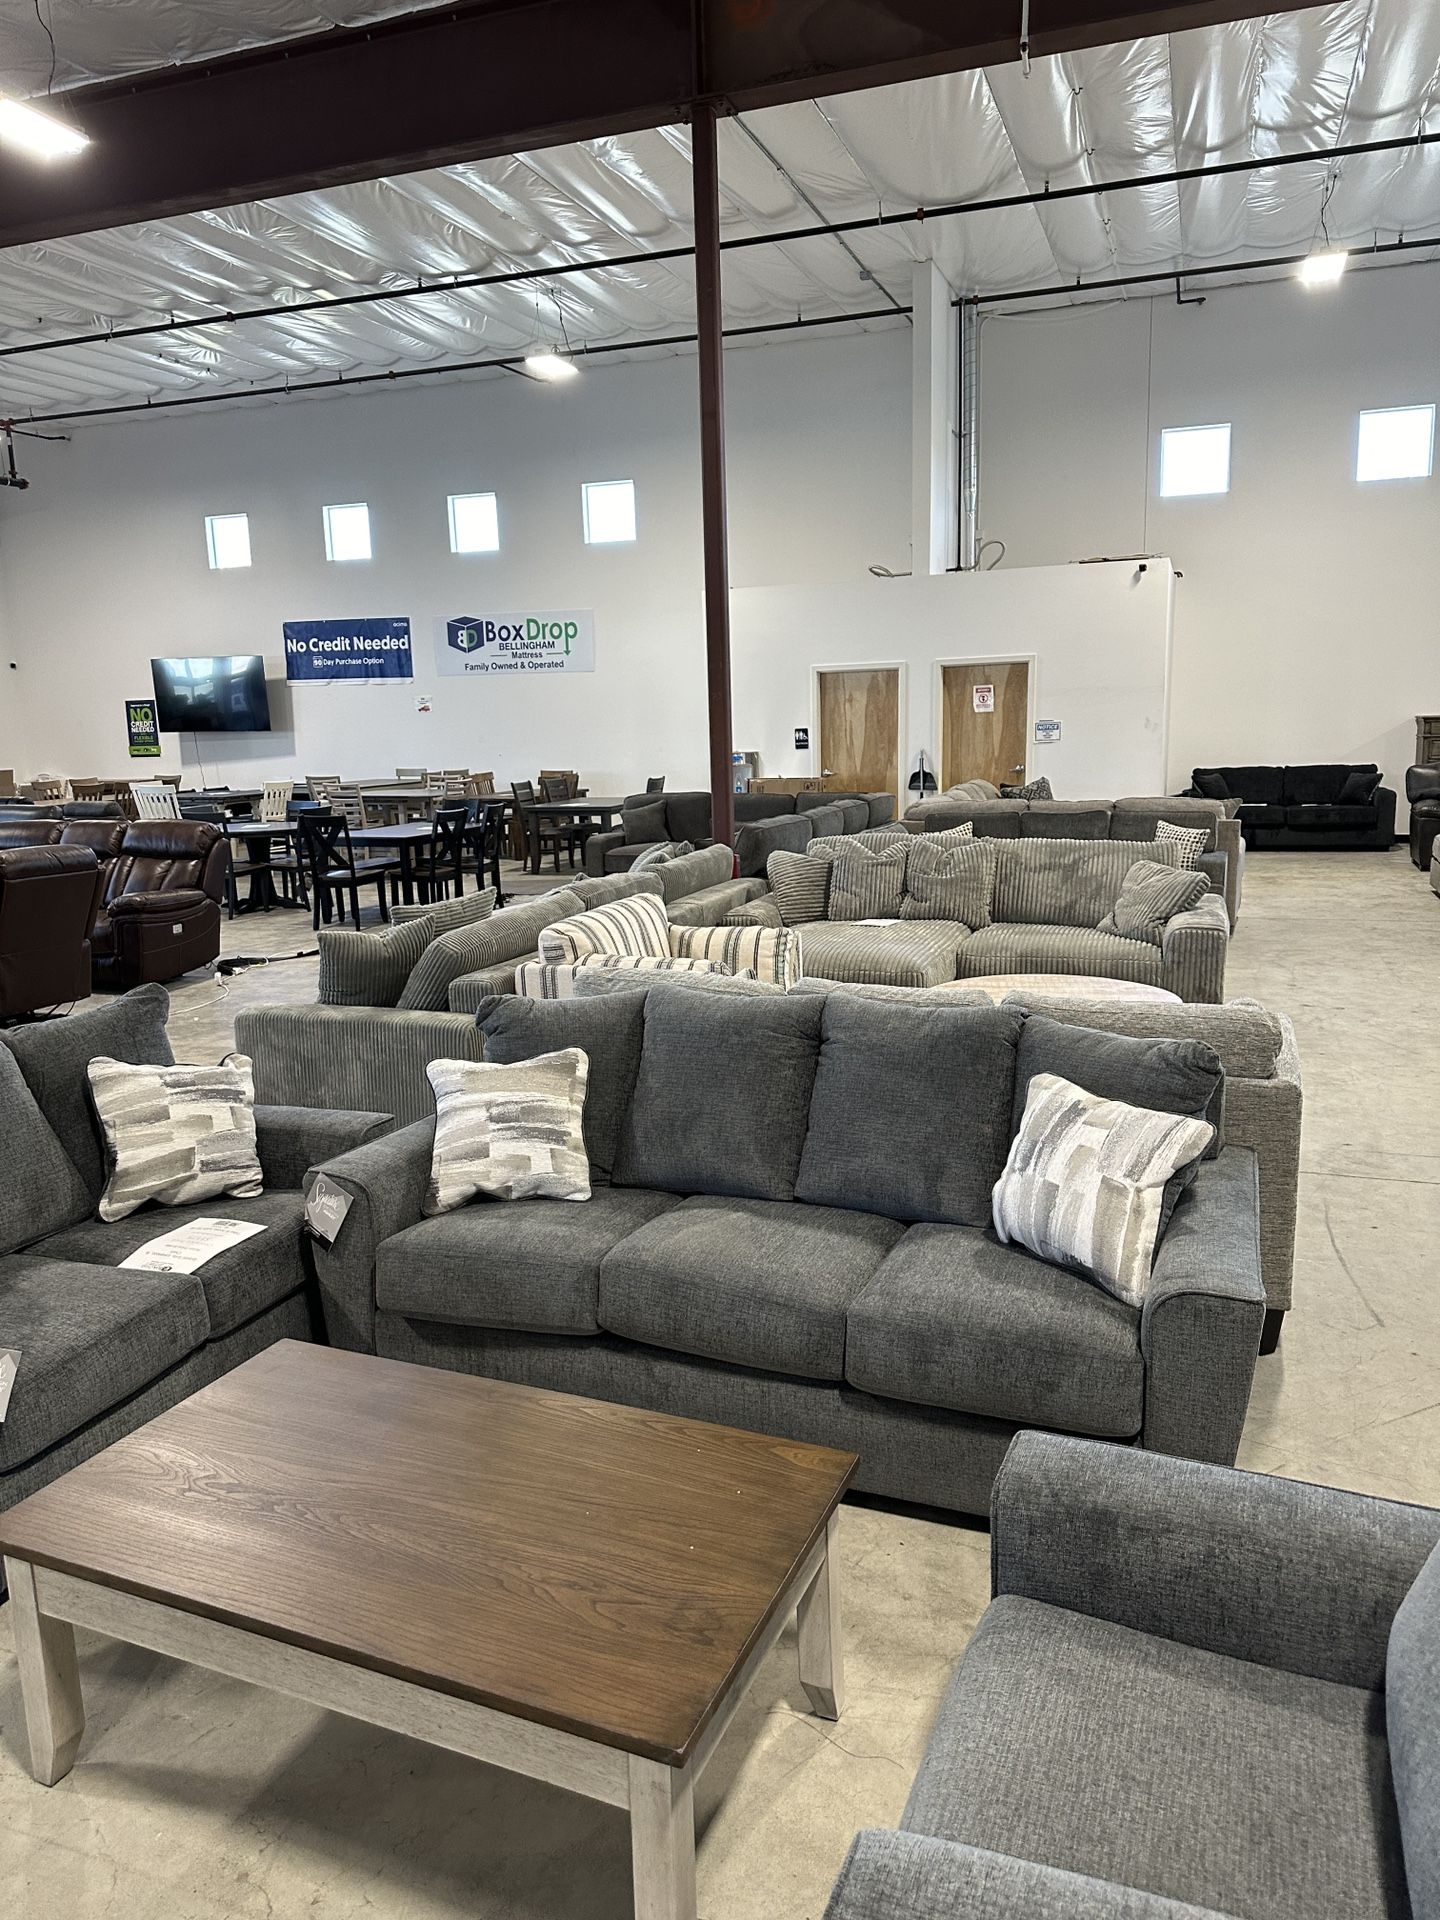 Brand new sofas, couches, loveseats, sectionals direct from the manufacturer! 